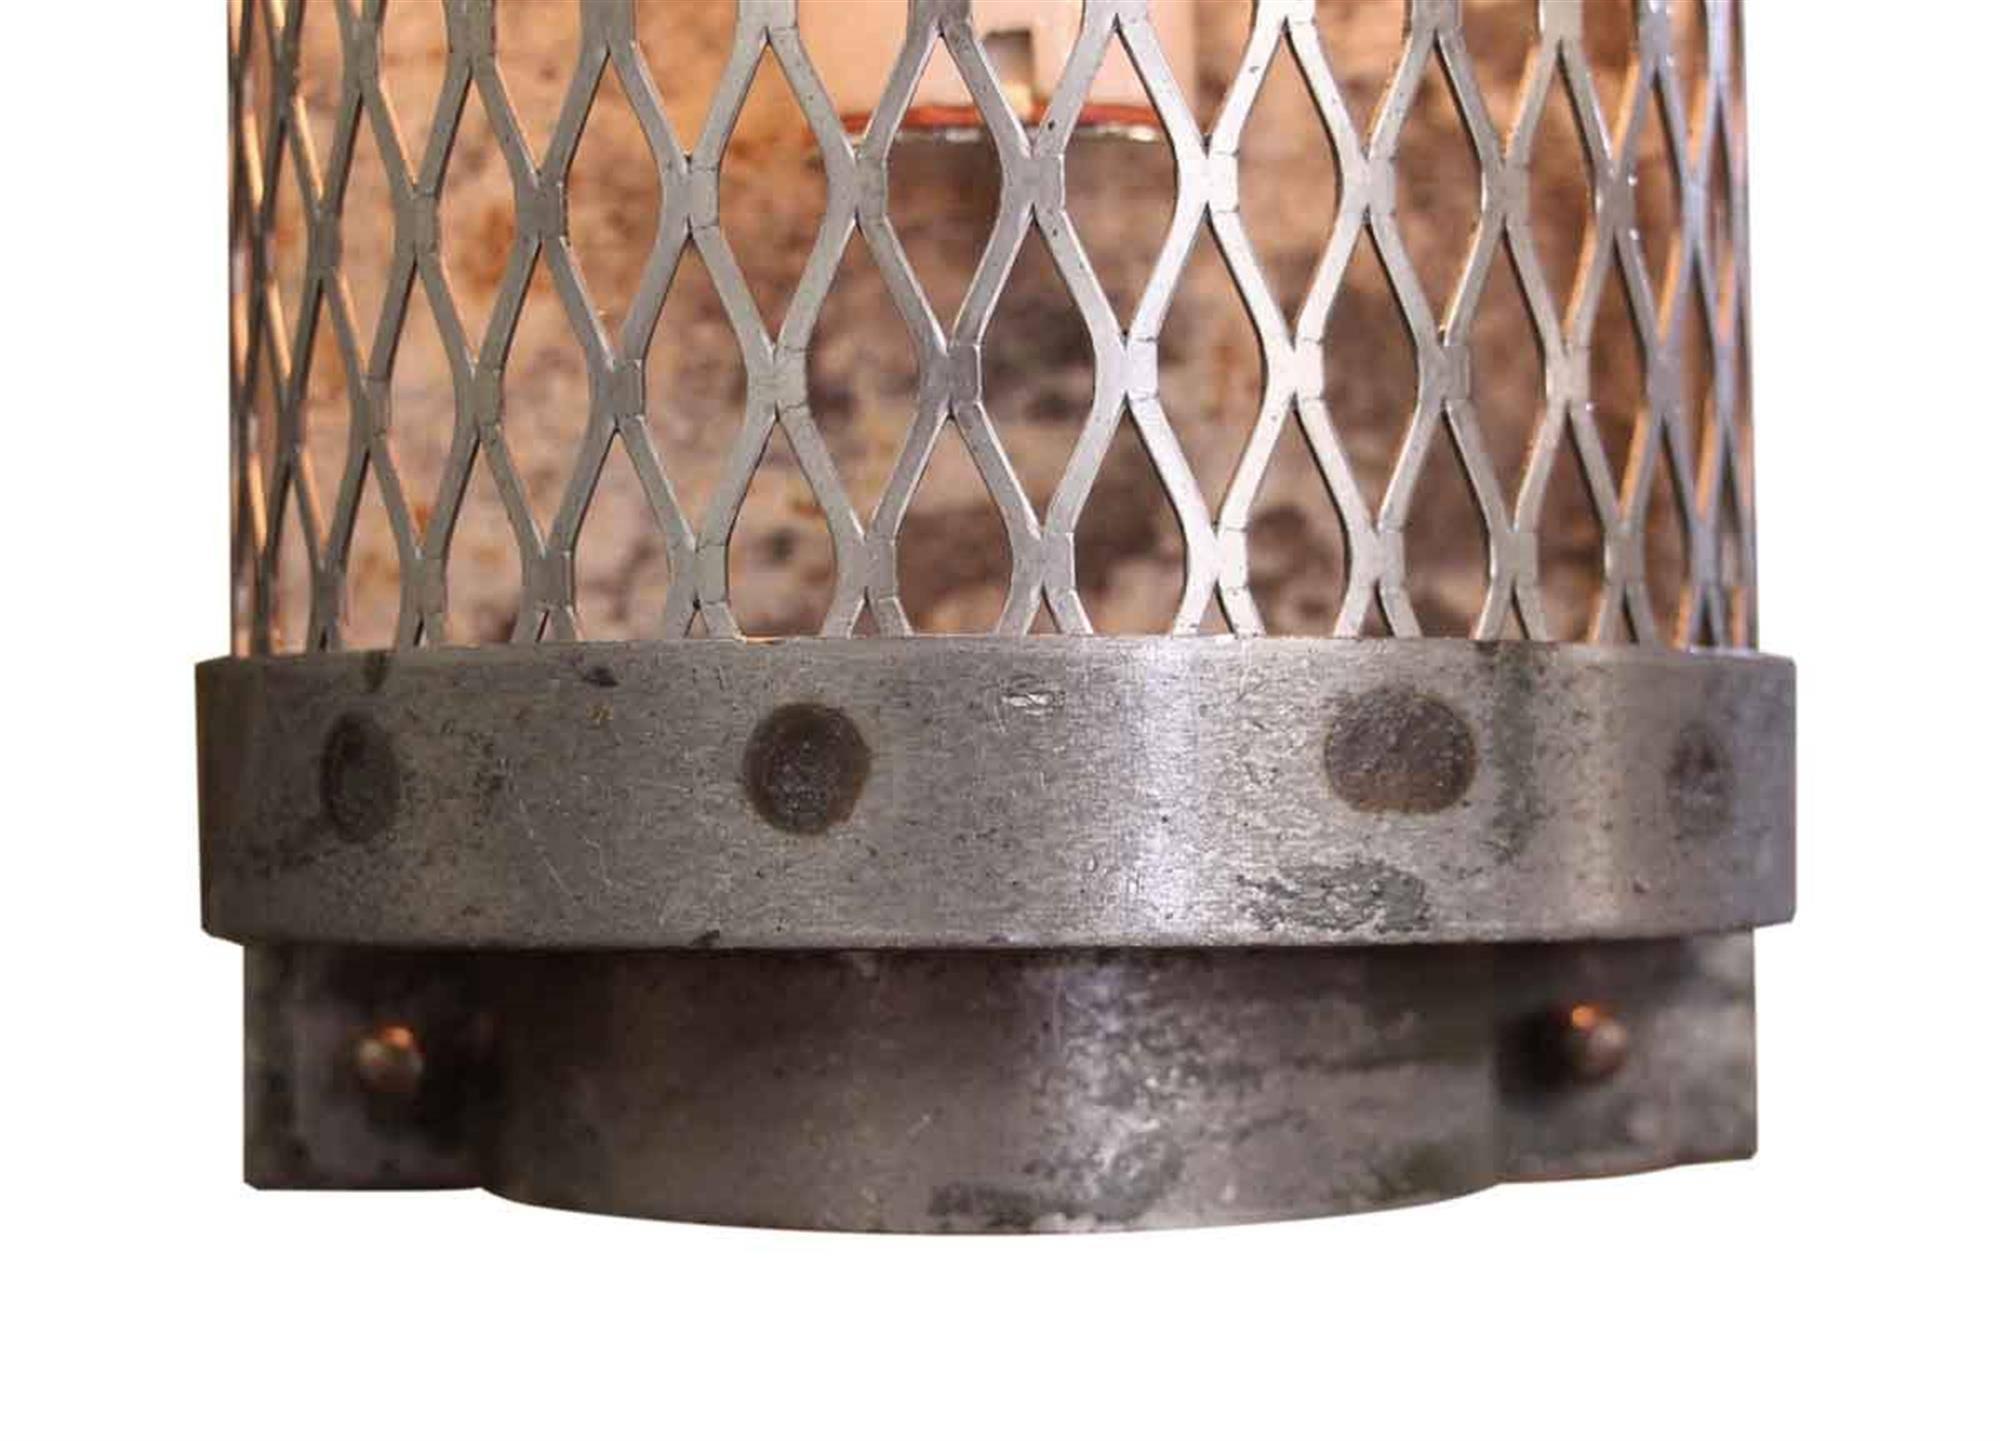 expanded metal cage